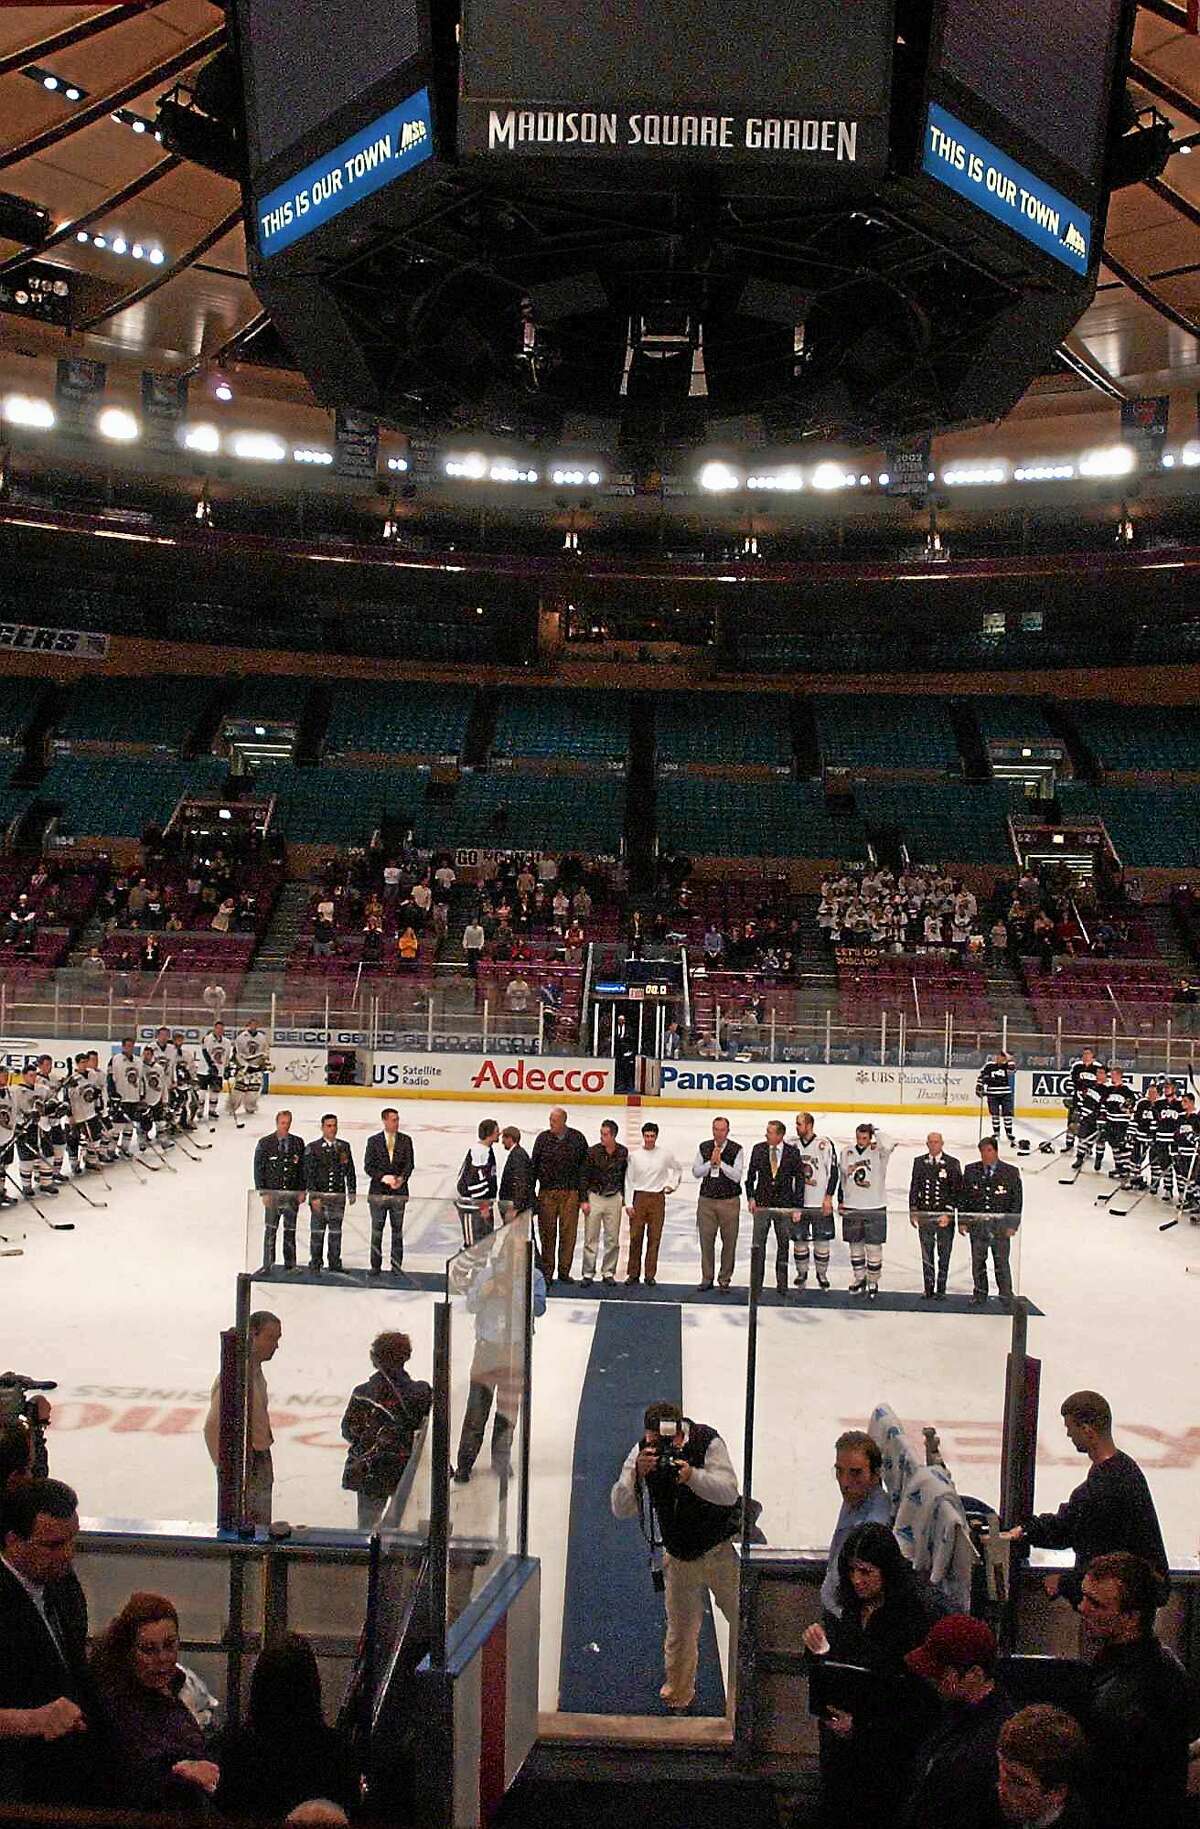 Members of the Quinnipiac and UConn hockey teams and administrators line up with representatives of firefighters and policemen during postgame ceremonies of the “Heroes Hat” at Madison Square Garden in 2003.